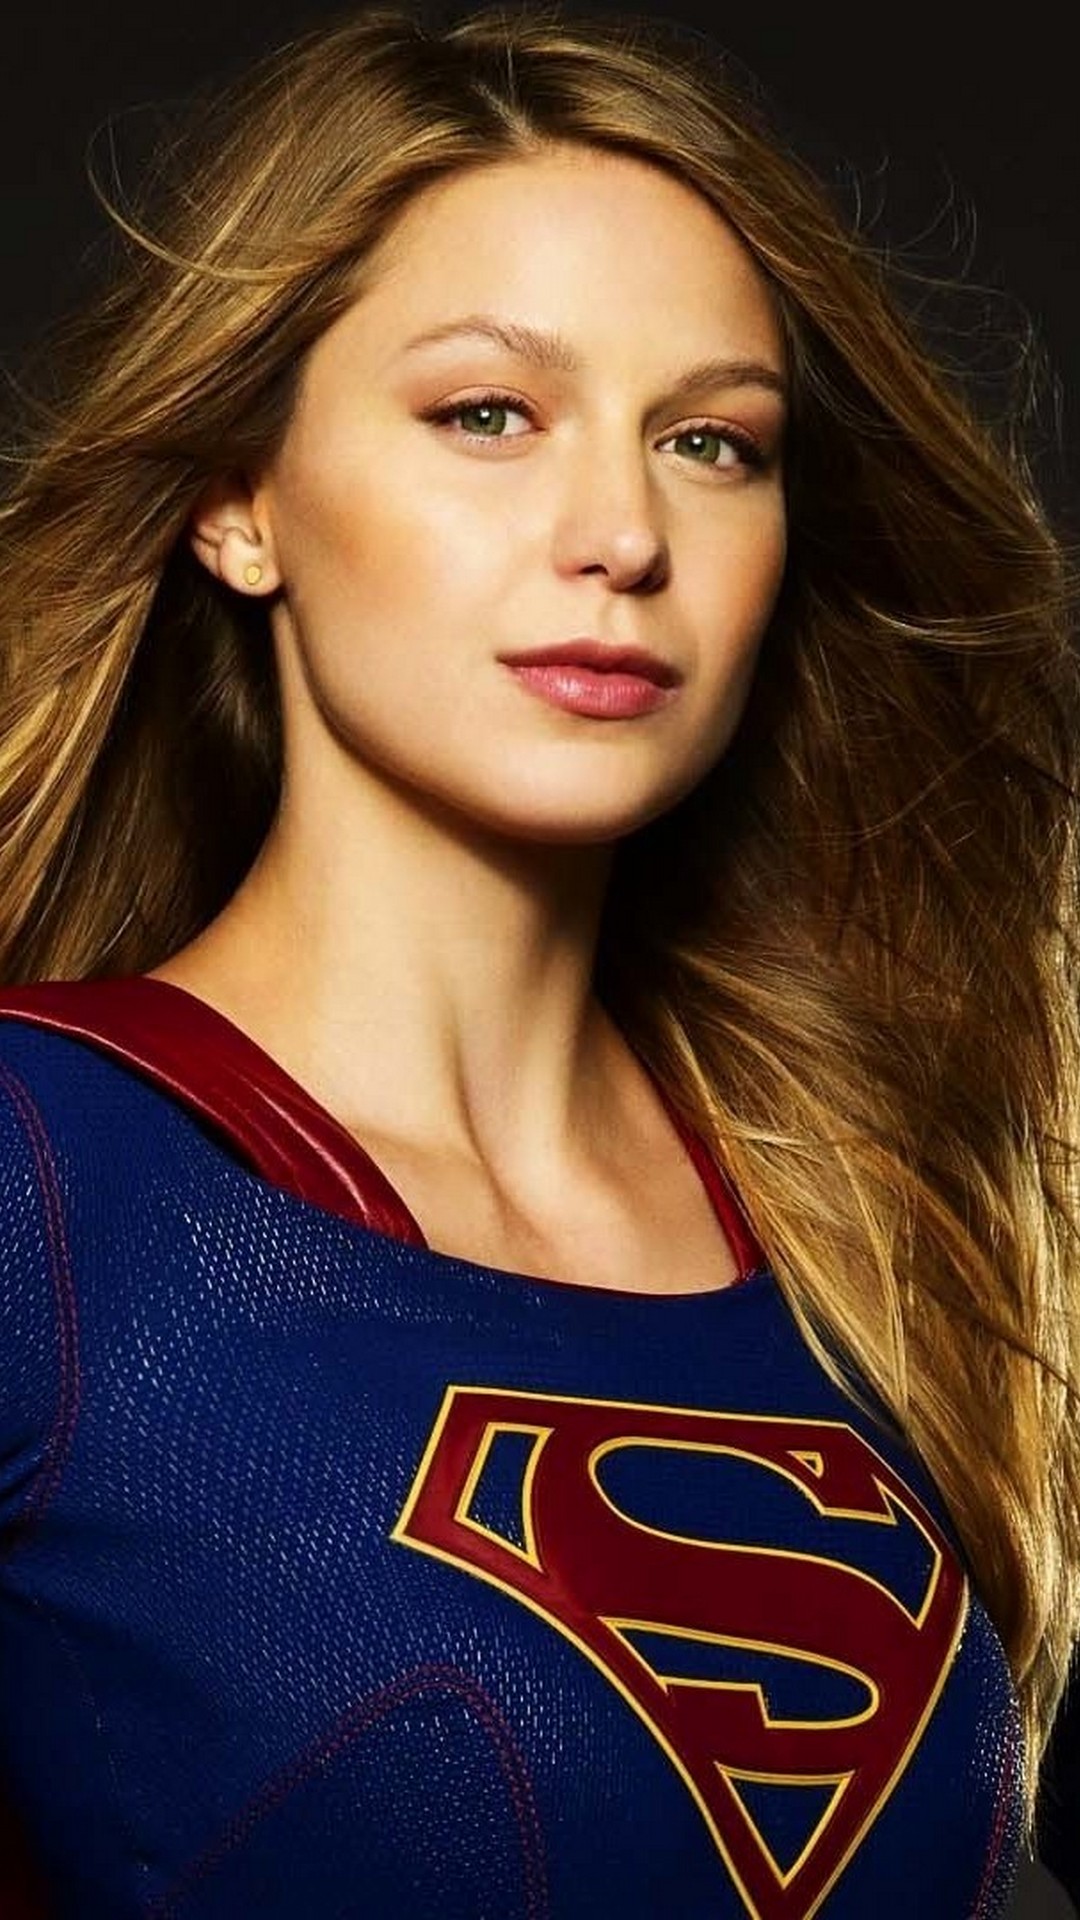 Supergirl iPhone 8 Wallpaper With high-resolution 1080X1920 pixel. You can use this wallpaper for your iPhone 5, 6, 7, 8, X, XS, XR backgrounds, Mobile Screensaver, or iPad Lock Screen